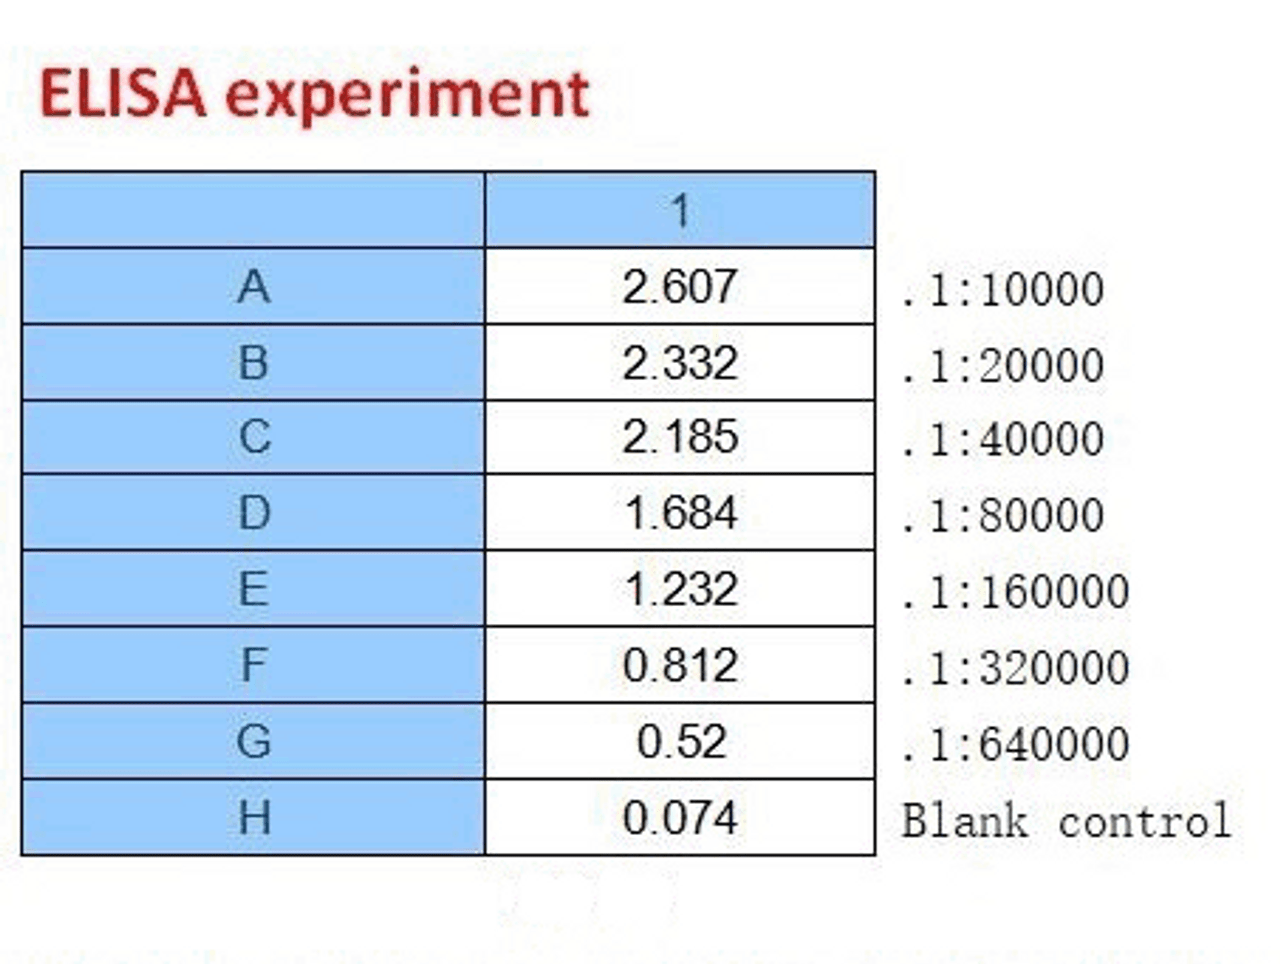 <strong>Figure 2 ELISA Test</strong><br>
Coating original concentration: 2 ug/mL, 100 uL/well sample is SARS-CoV-2 (COVID-19) Nucleocapsid Recombinant Protein, 10-007.<br>Antibodies: SARS-CoV-2 (COVID-19) Nucleocapsid Monoclonal Antibody, 10-546.<br>Secondary: Goat anti-human IgG HRP conjugate at 1:10000 dilution.<br>Develop: 15min, 100 uL/well.<br>Stop: Stop buffer 50 uL/well.